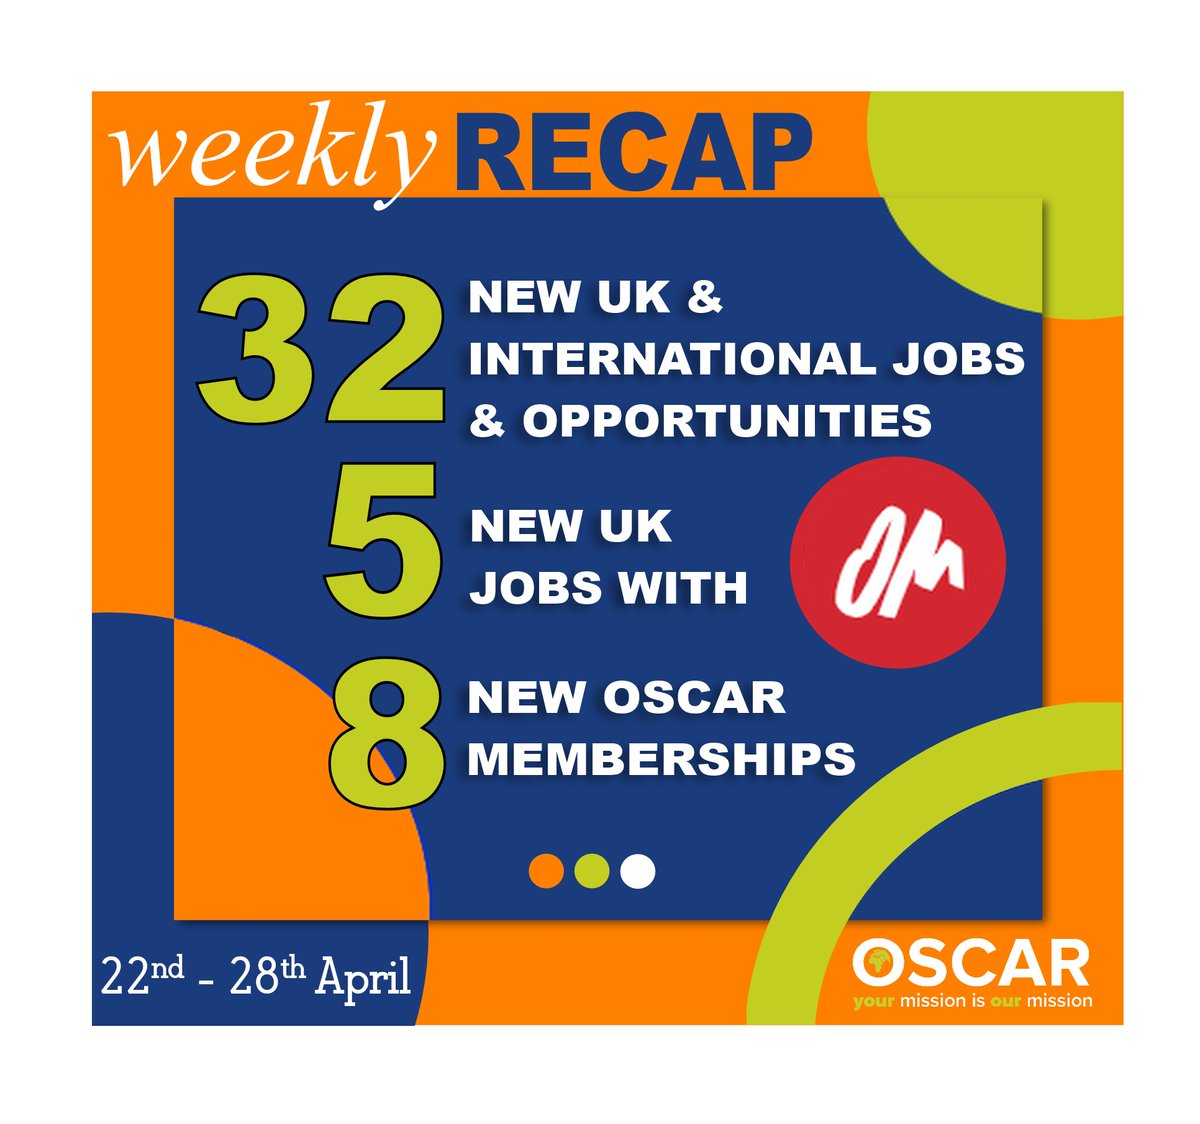 OSCAR is the UK's largest advertiser for Christian jobs, opportunities, and mission, ministry, and church work vacancies. oscar.org.uk/opportunities #ChristianJobs #ChristianJobsUK #UKChristianJobs #ChurchJobs #Missions #ChristianGapYear #ShortTermMission